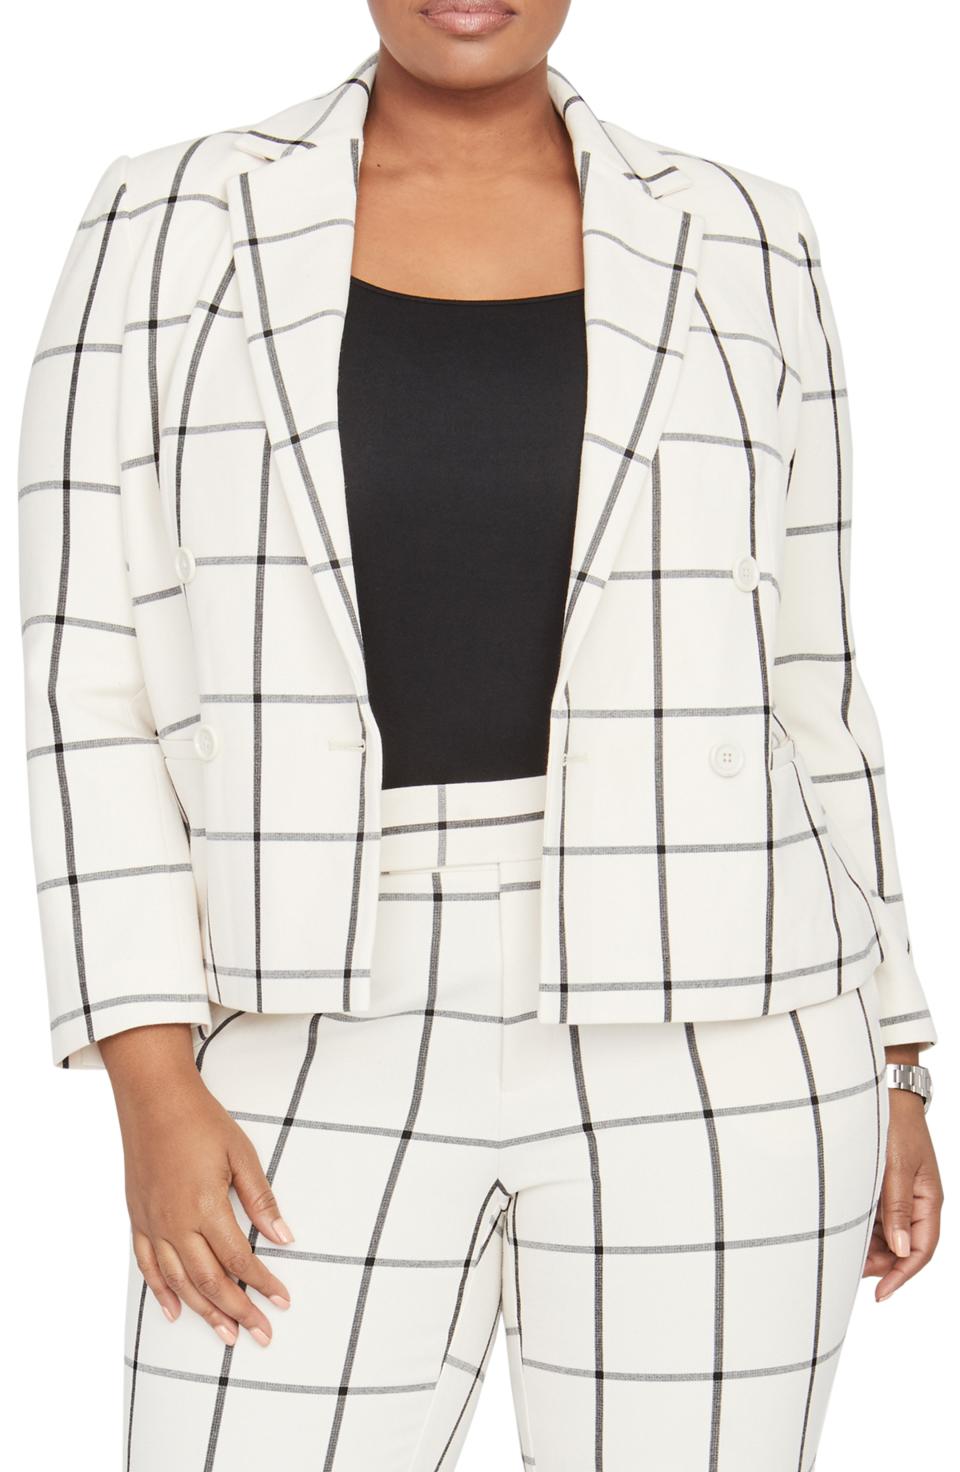 4) A Blazer That's Both Professional and Casual